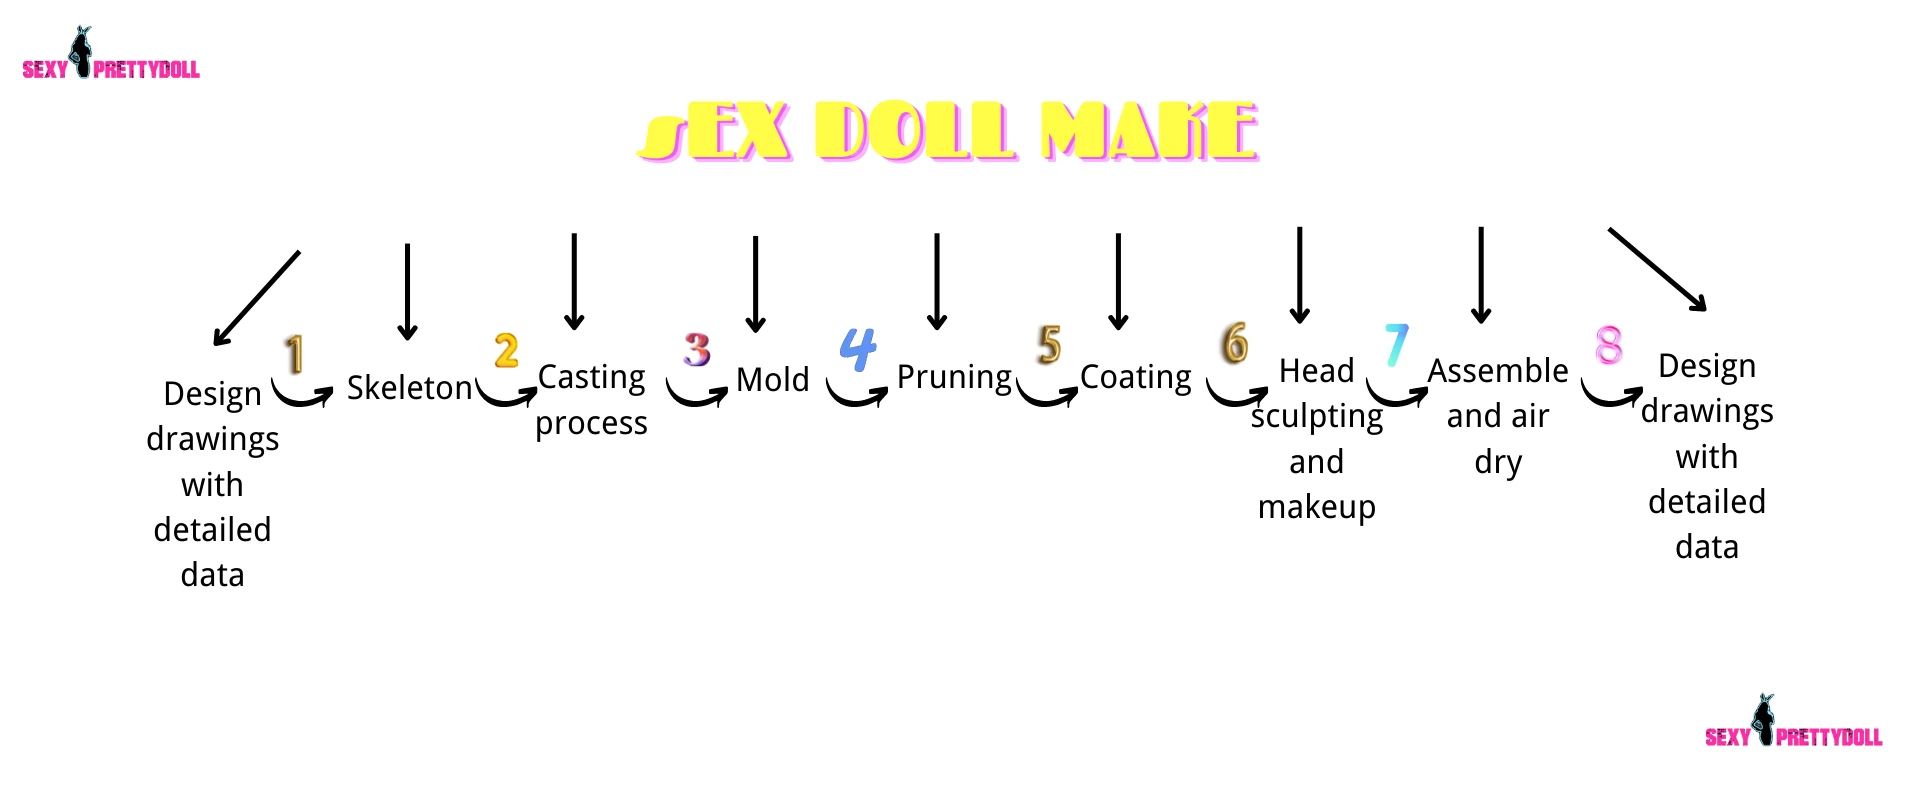 Sexyprettydoll blog One of the complete guides to learning about sex dolls-sex doll make